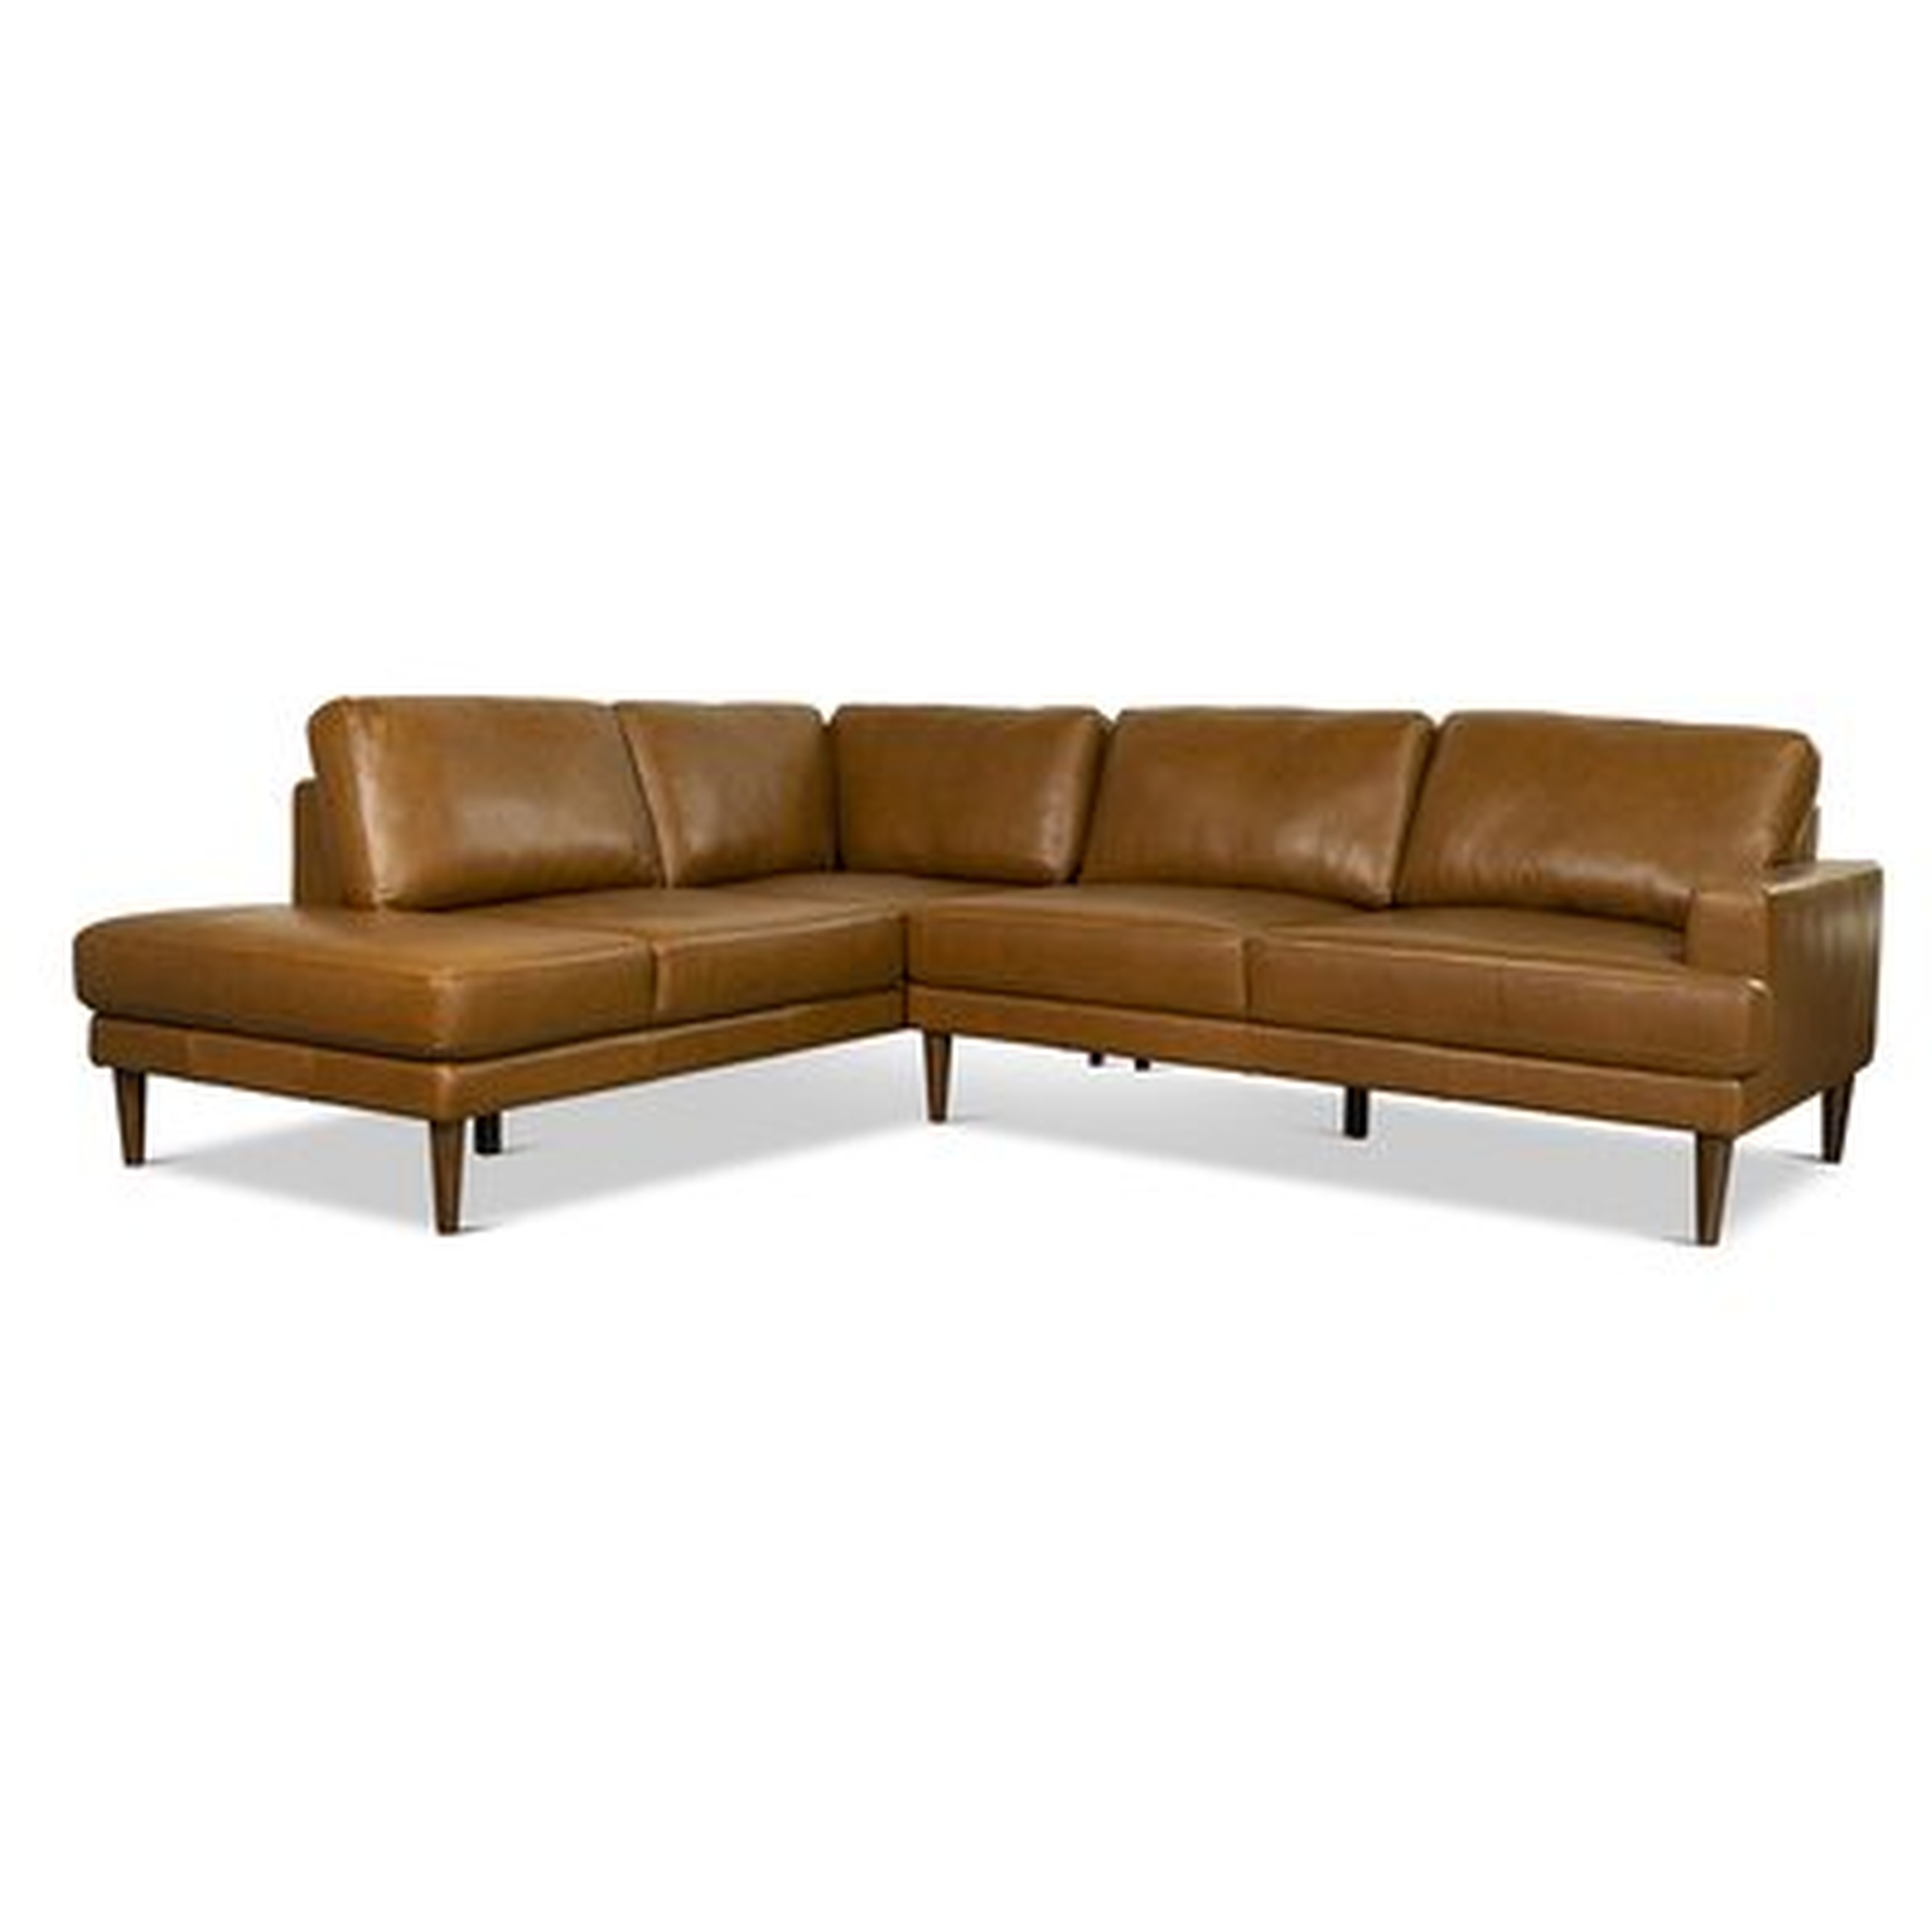 Simba Mid-Century Pillow Back Genuine Leather Left-Facing Sectional In Tan - Wayfair